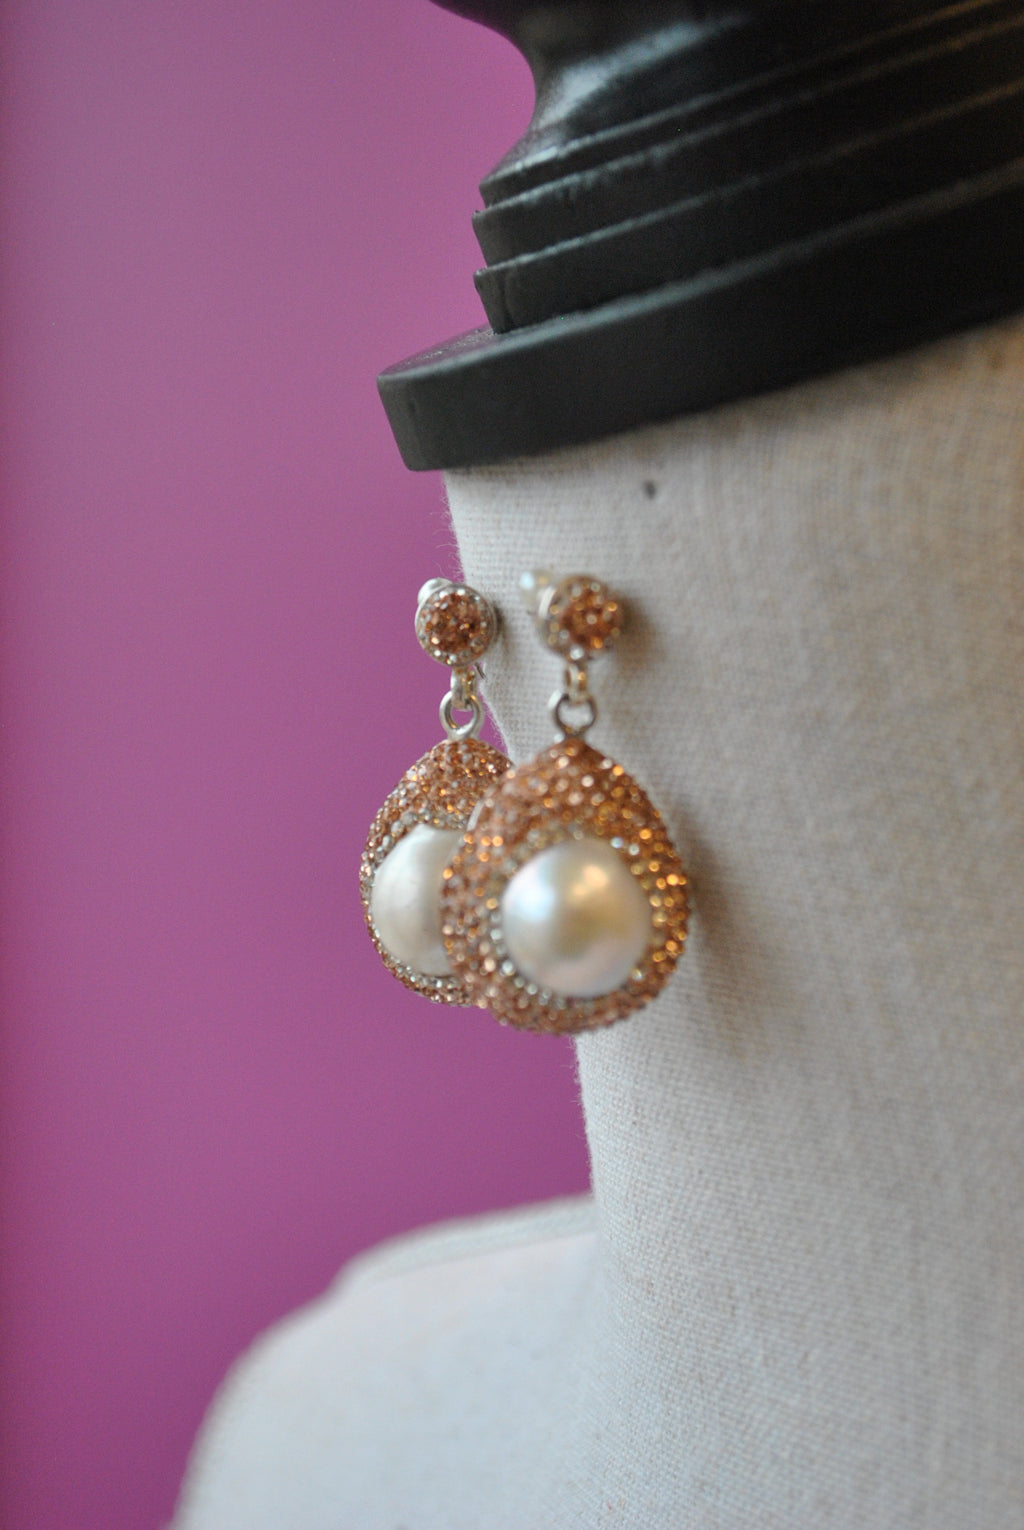 WHITE FRESHWATER PEARLS AND CHAMPAIGN SWAROVSKI CRYSTALS ELEGANT EARRINGS